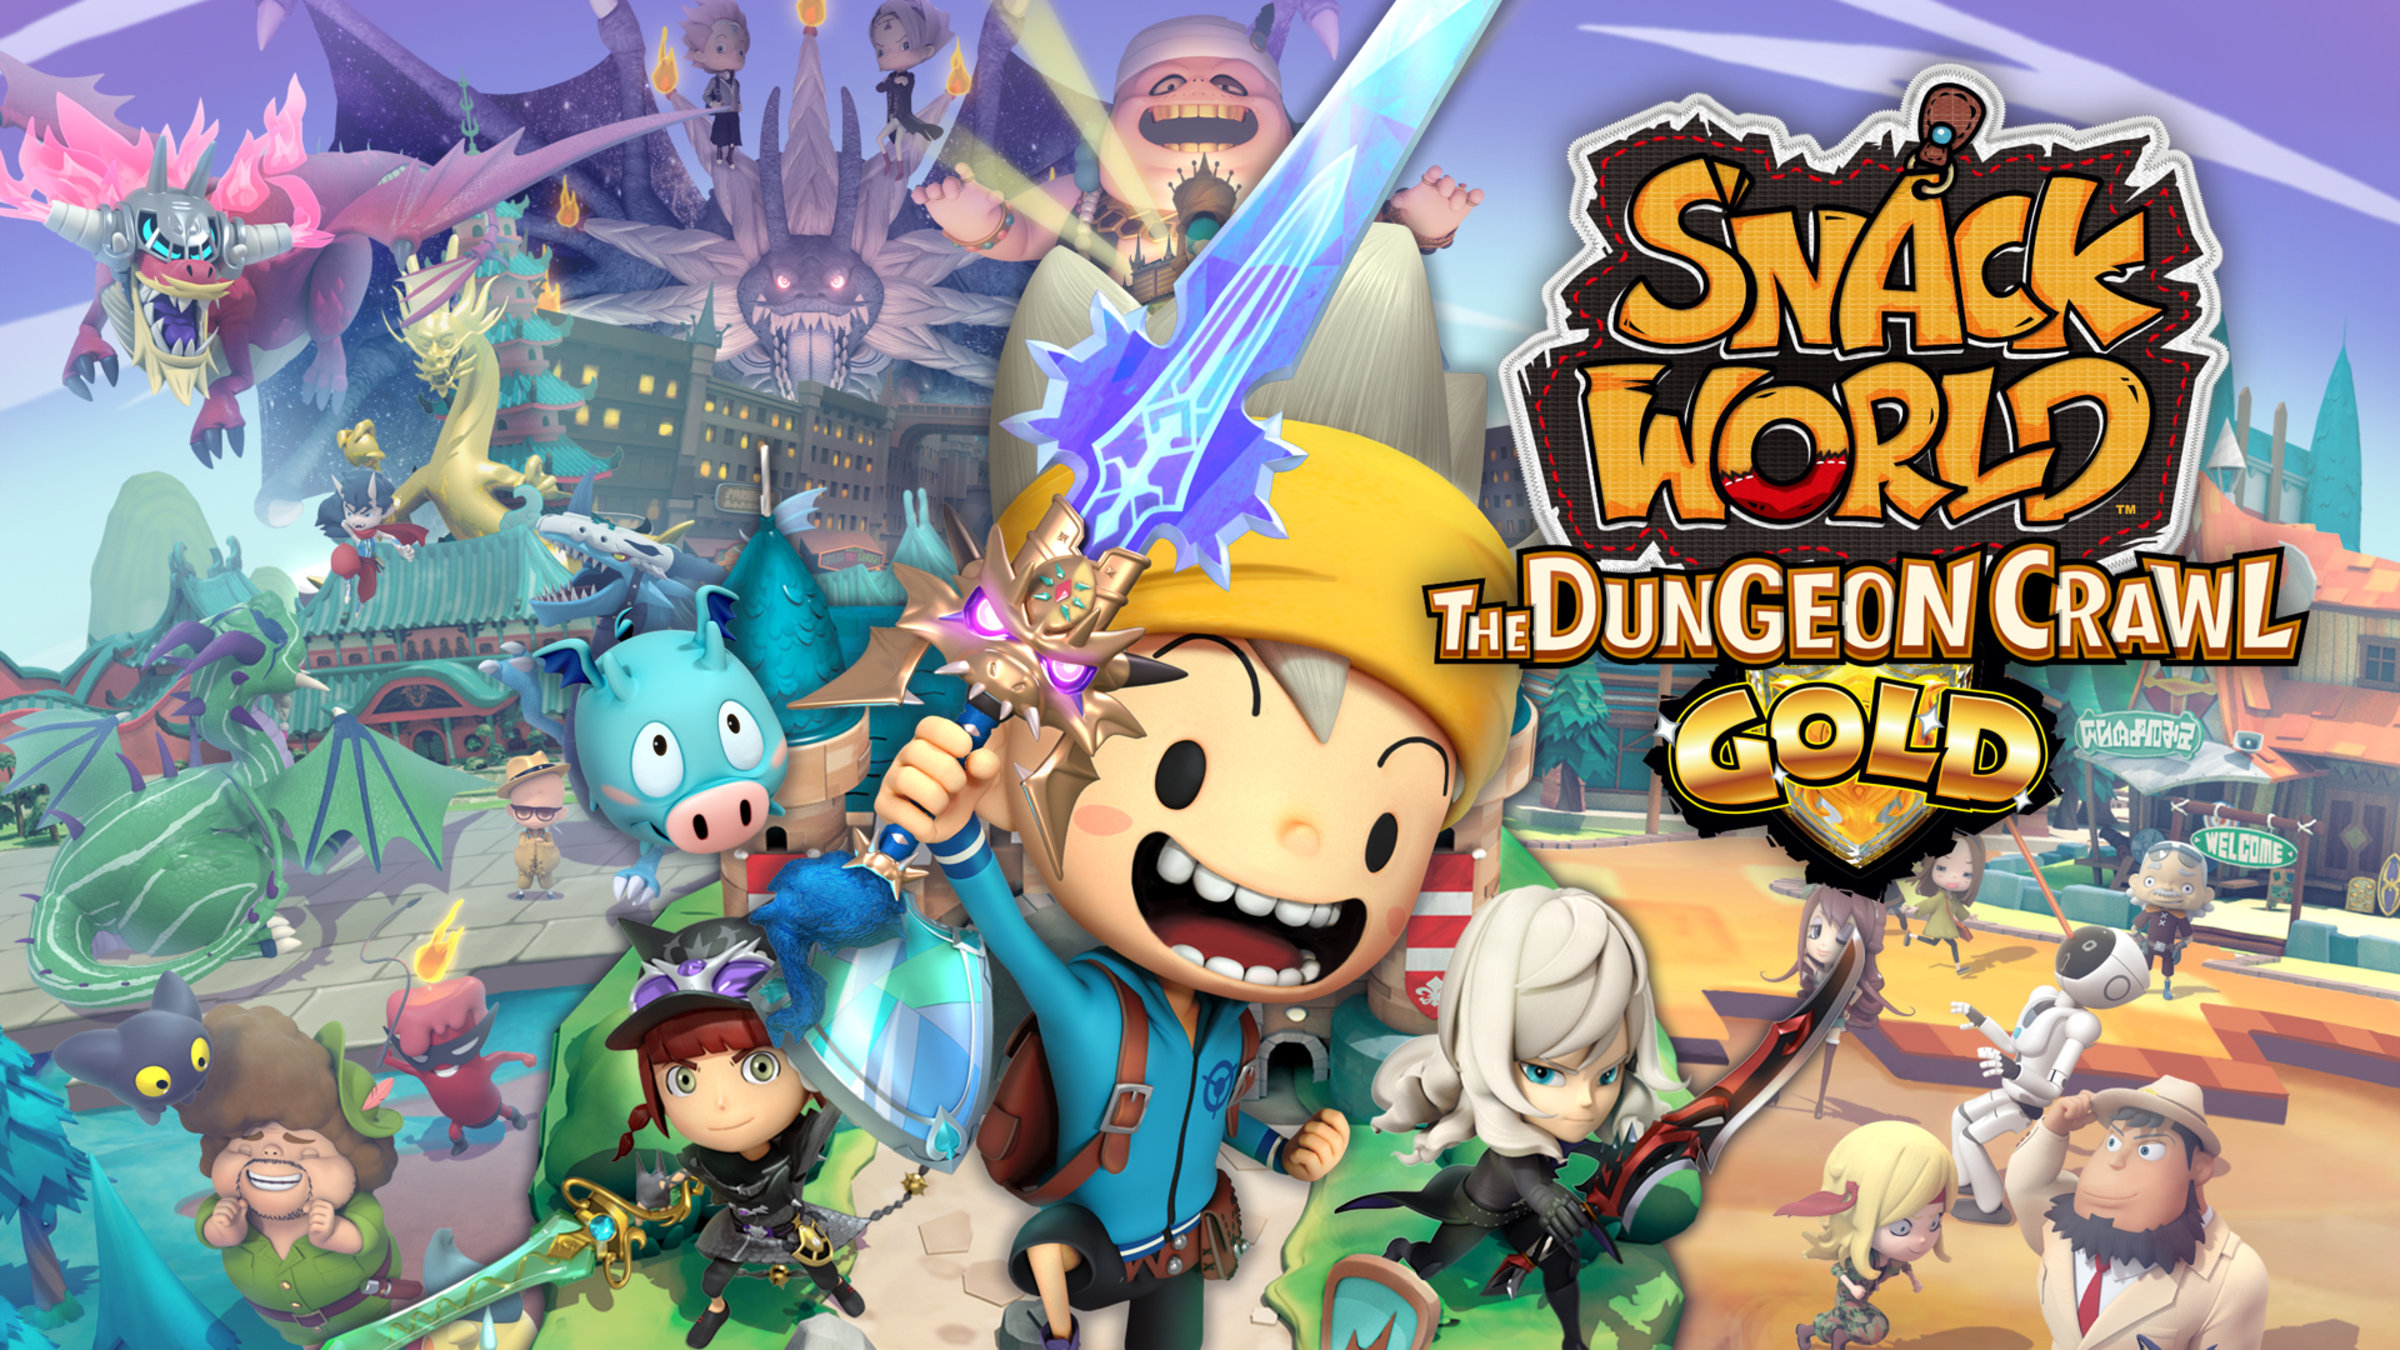 mirror Inconvenience bridge SNACK WORLD: THE DUNGEON CRAWL — GOLD for Nintendo Switch - Nintendo  Official Site